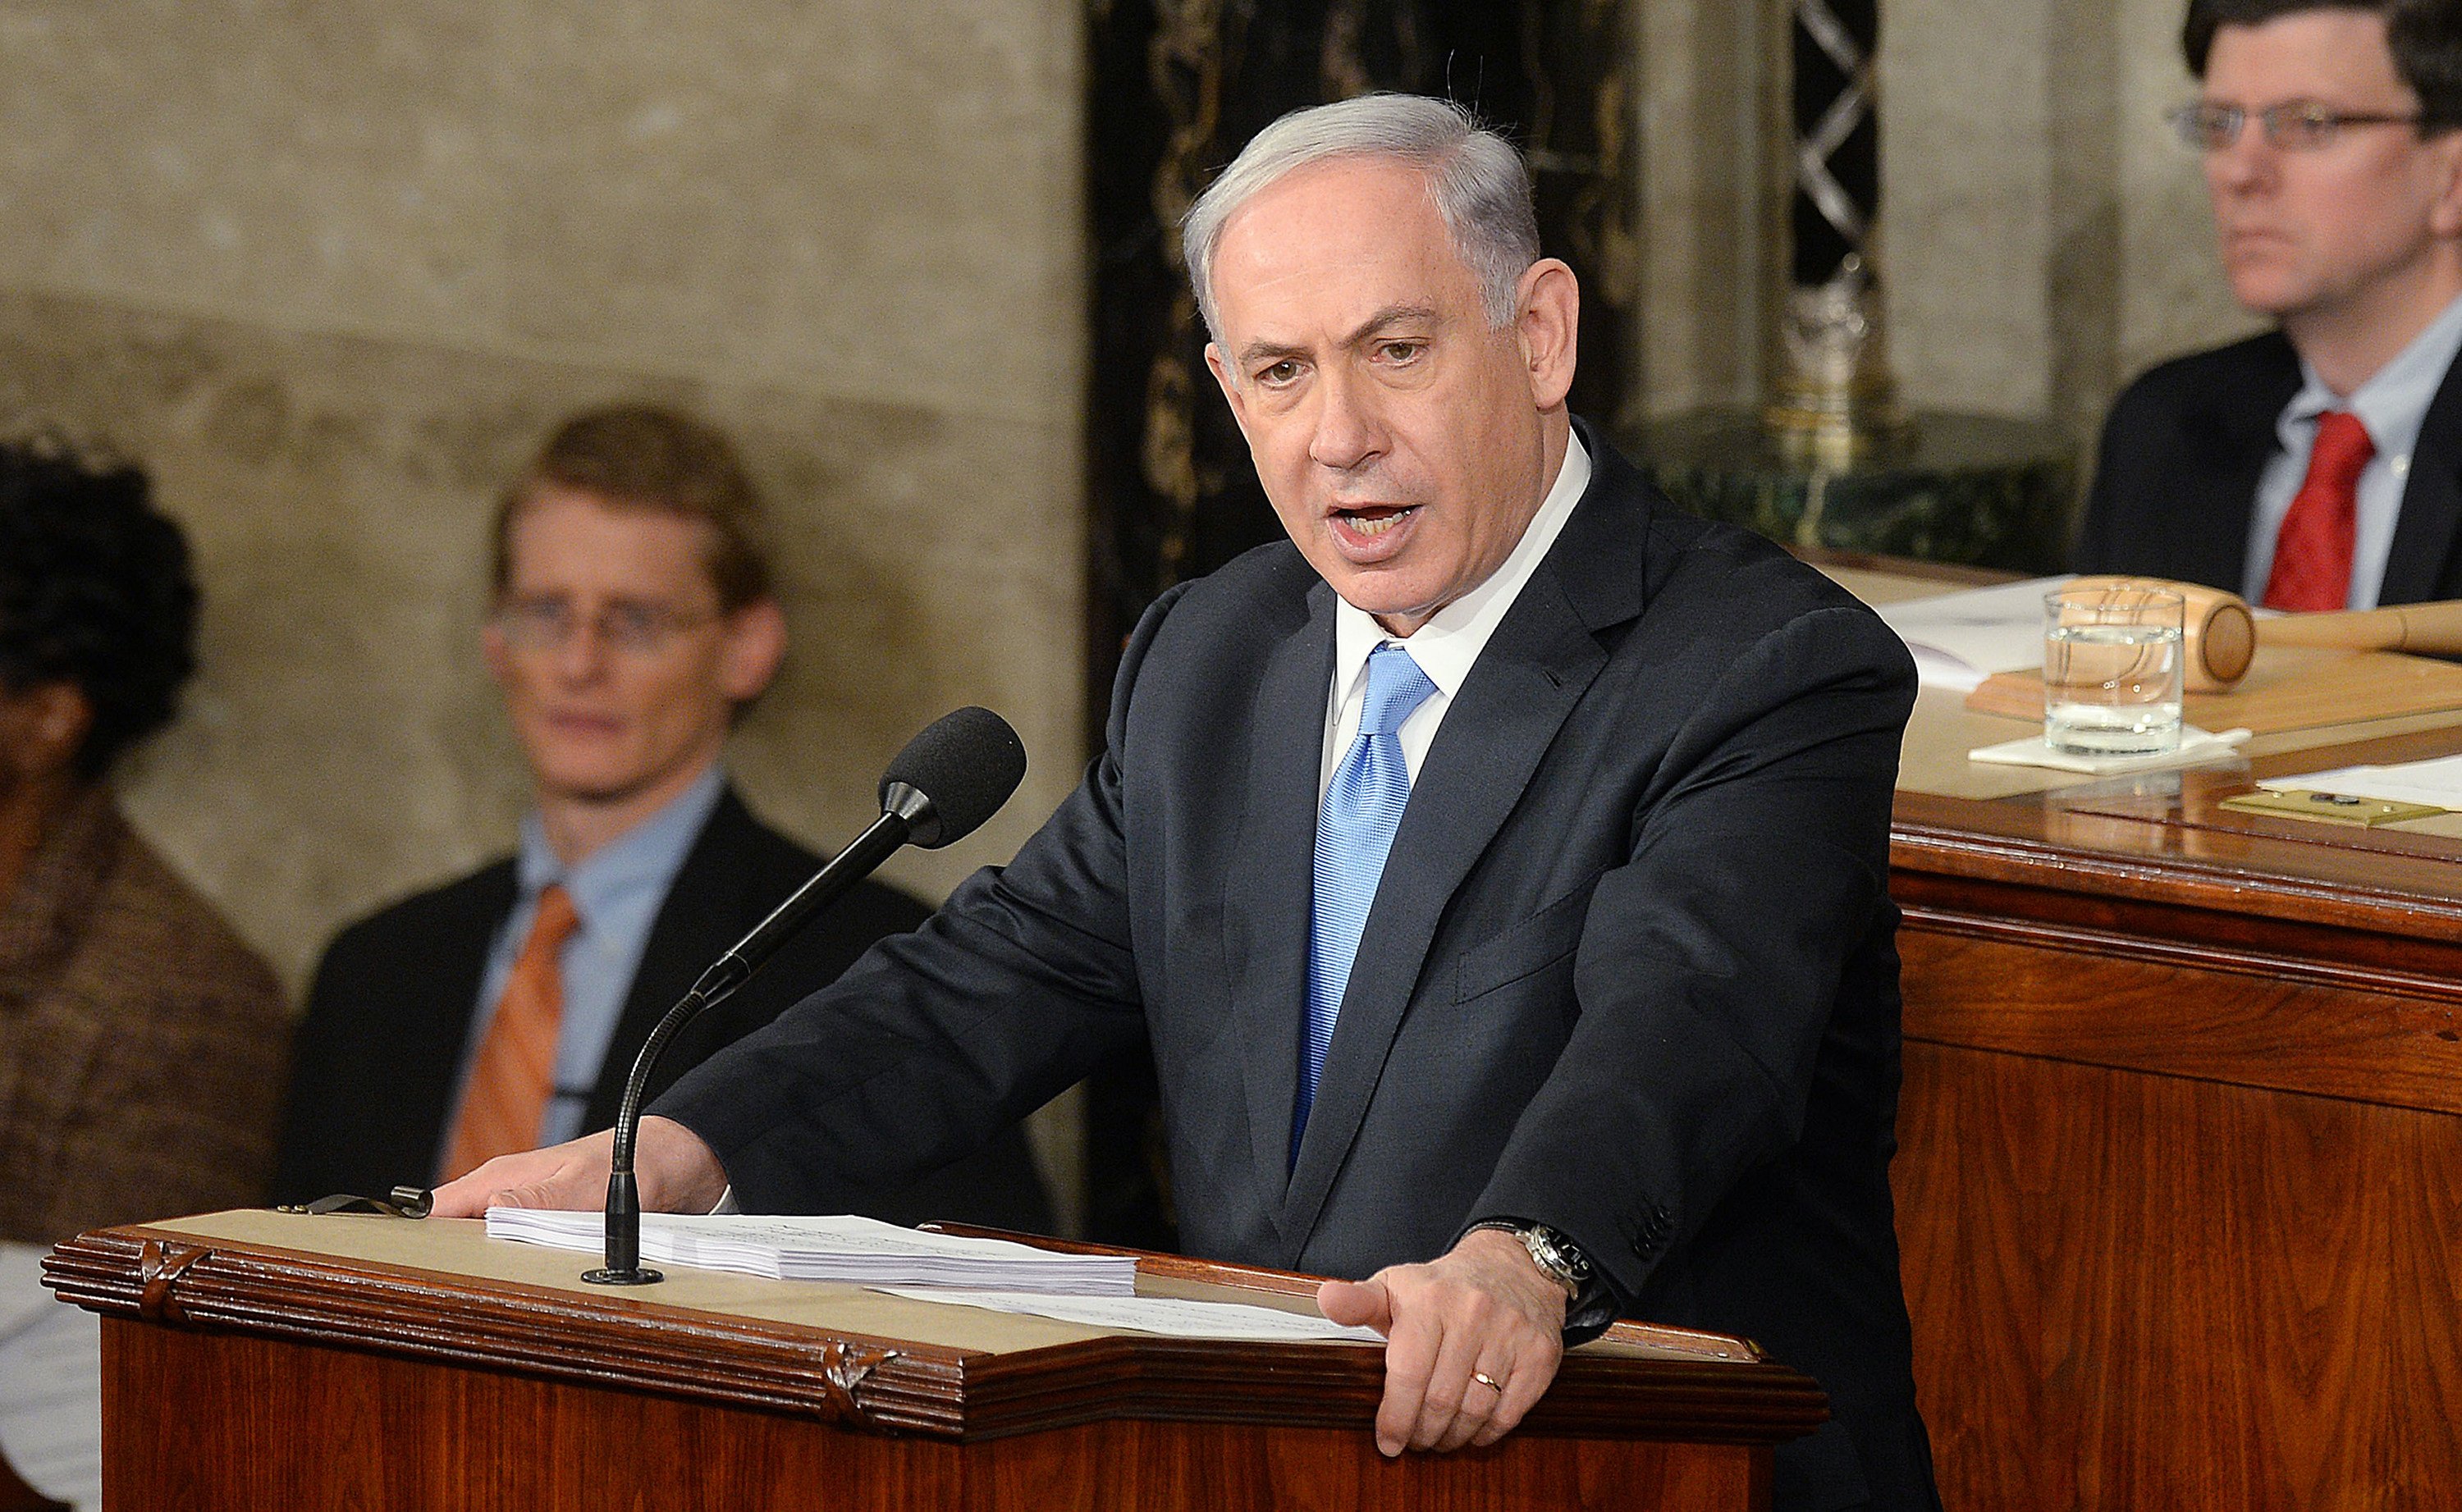 Israeli Prime Minister Benjamin Netanyahu addressing a joint session of the US Congress in 2015. File photo: TNS